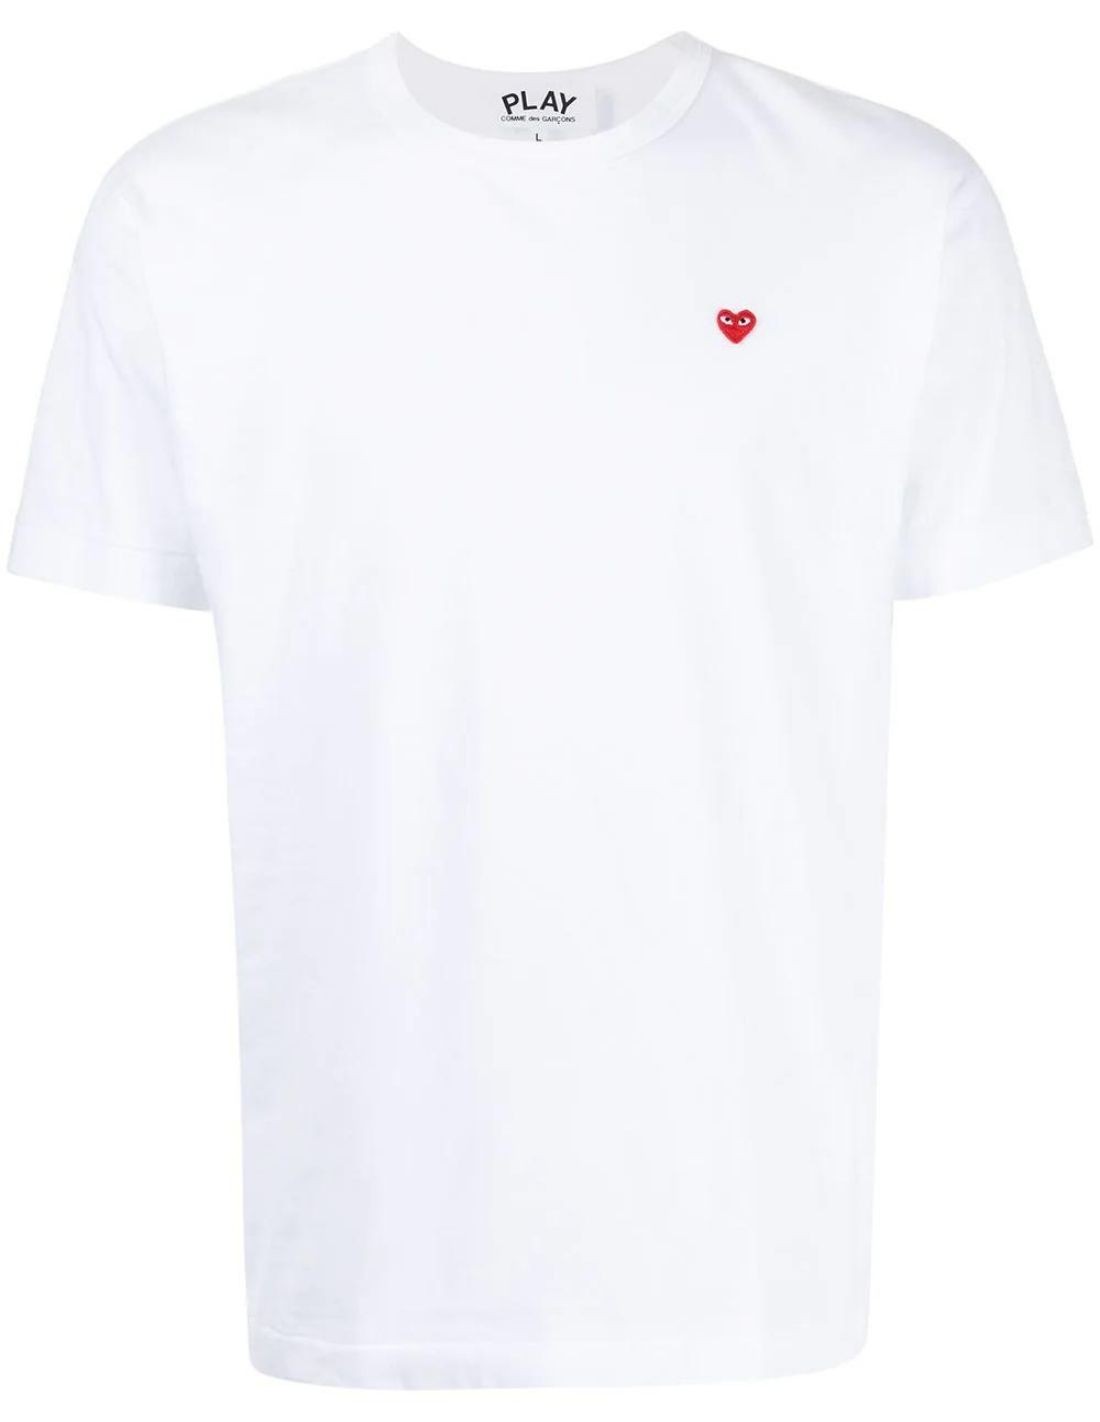 White t-shirt mini red heart embroidered CDG unisex